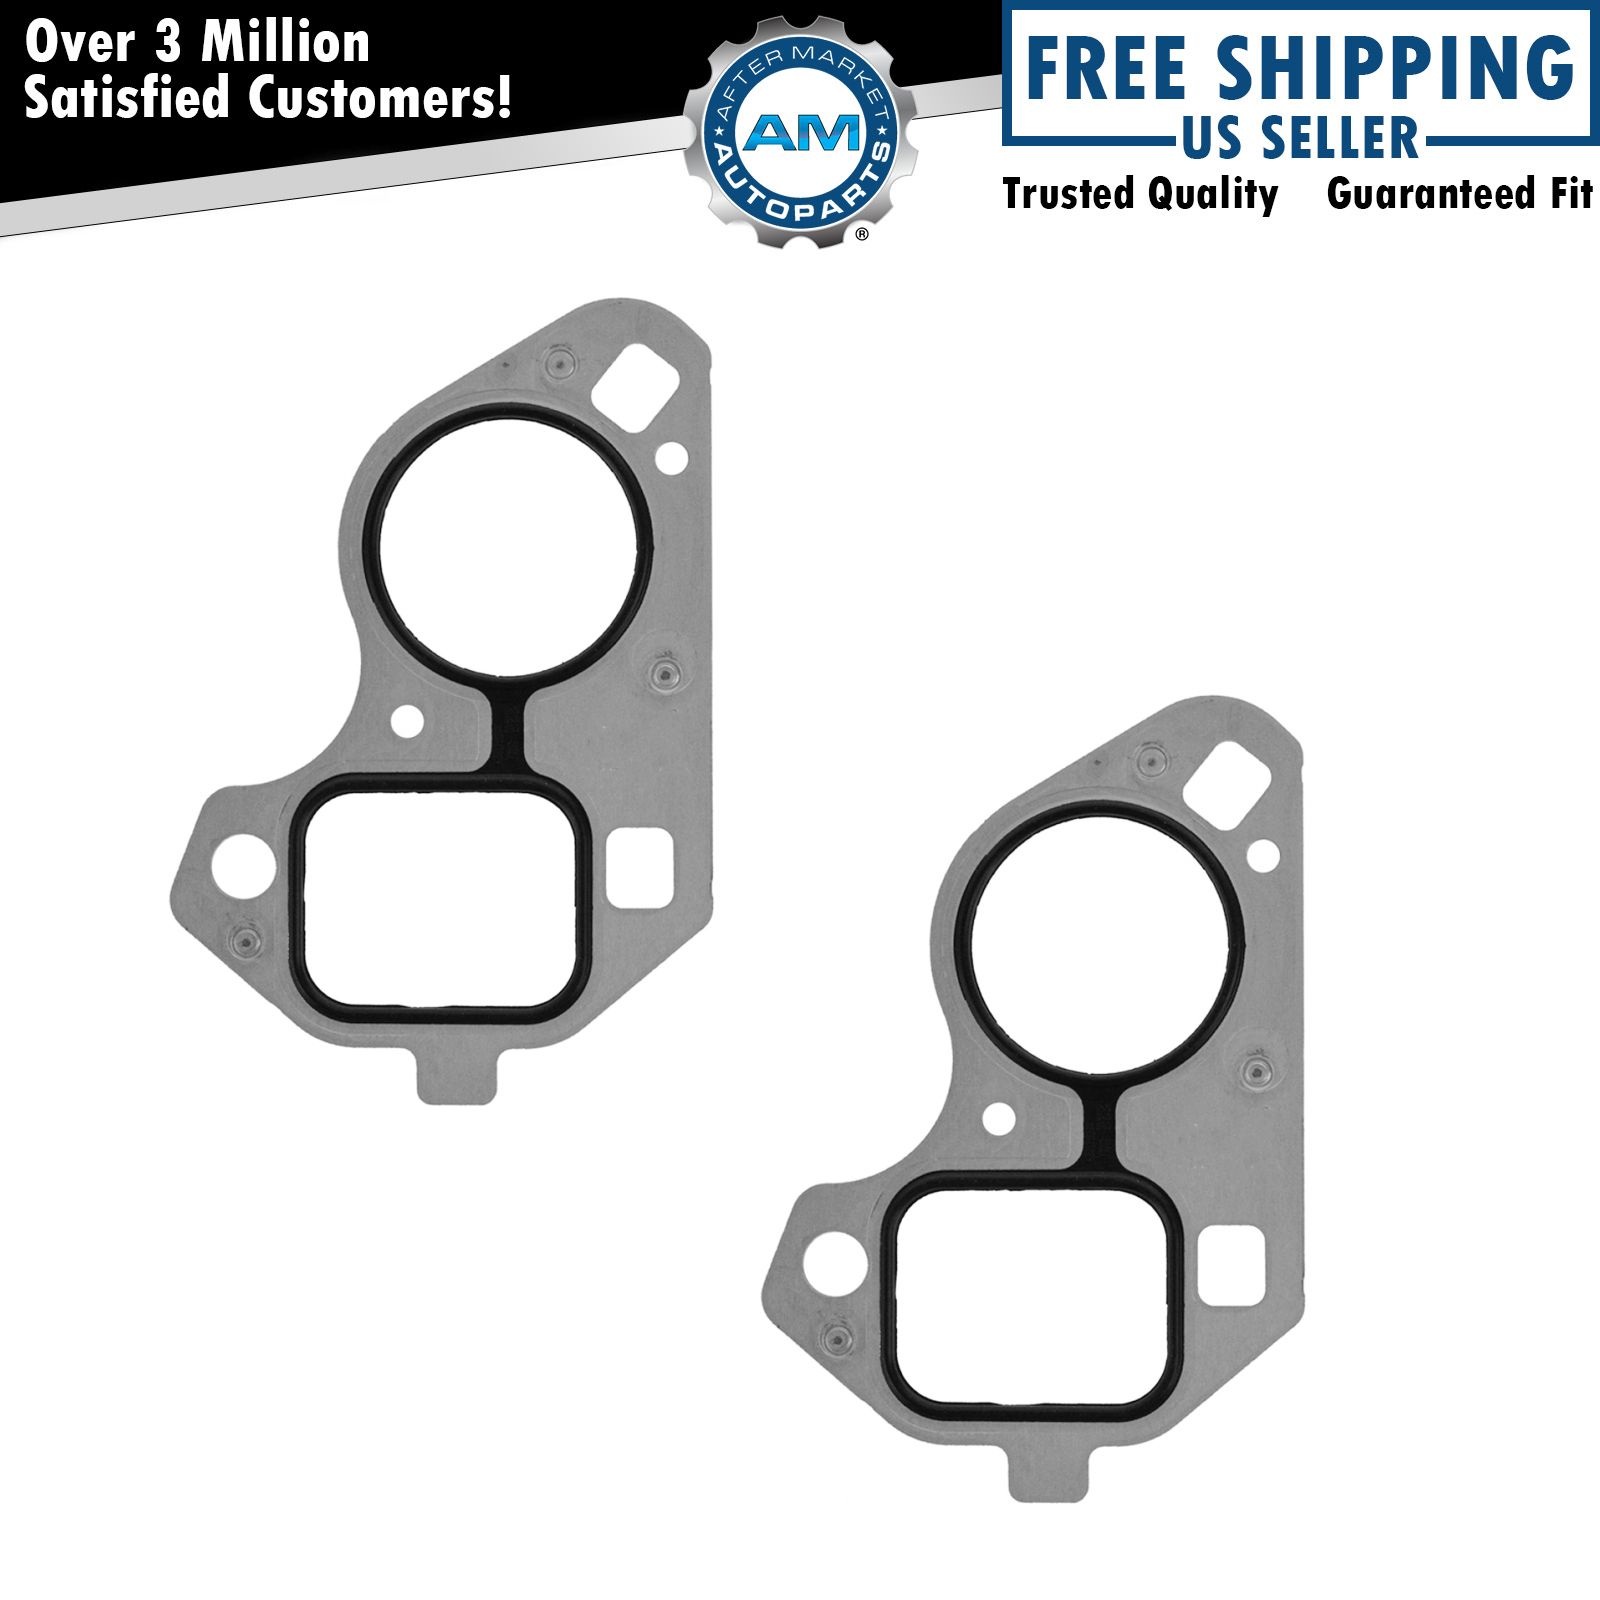 AC DELCO 251-663 Water Pump Gasket Pair For Chevy GMC Car Pickup Truck SUV